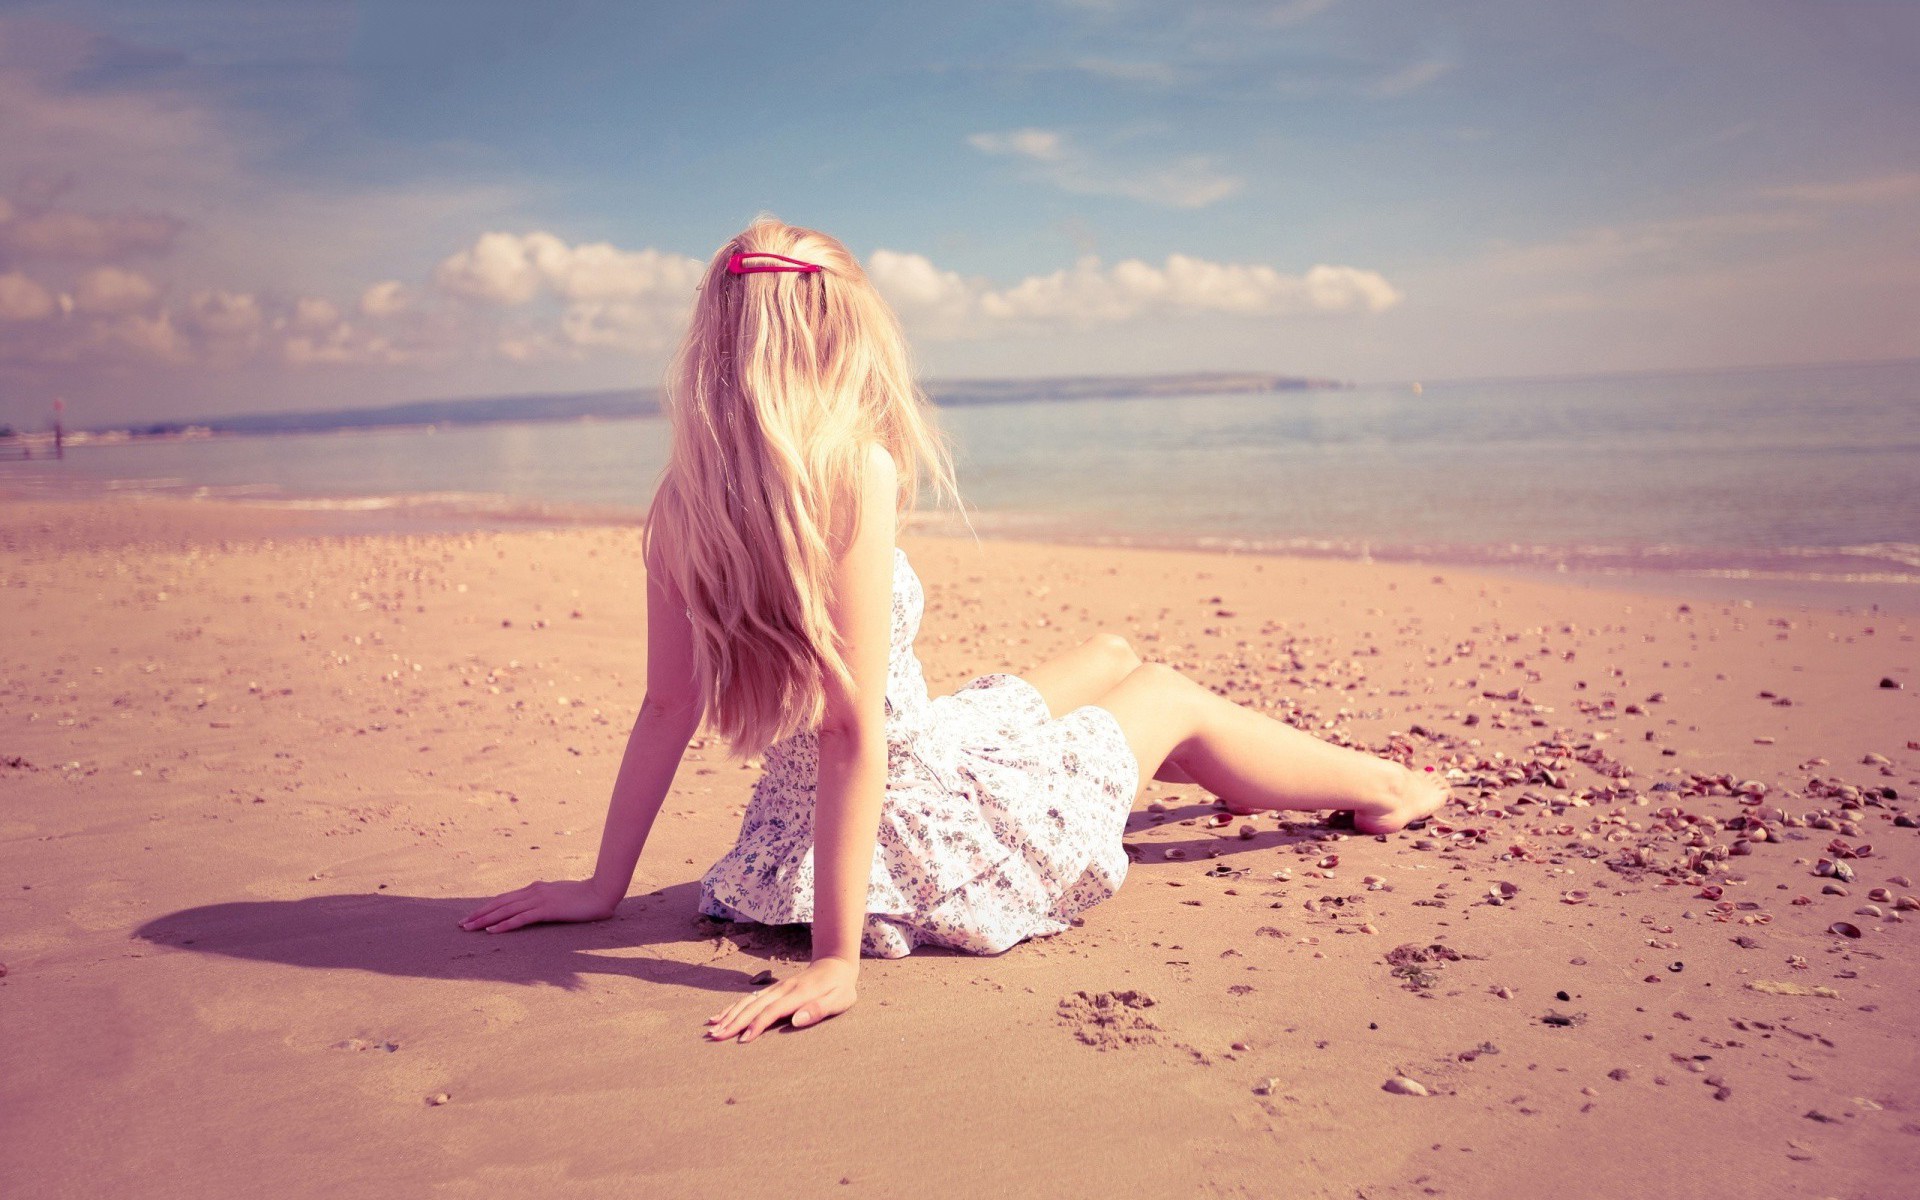 beach girl wallpaper,people in nature,sky,pink,beauty,blond